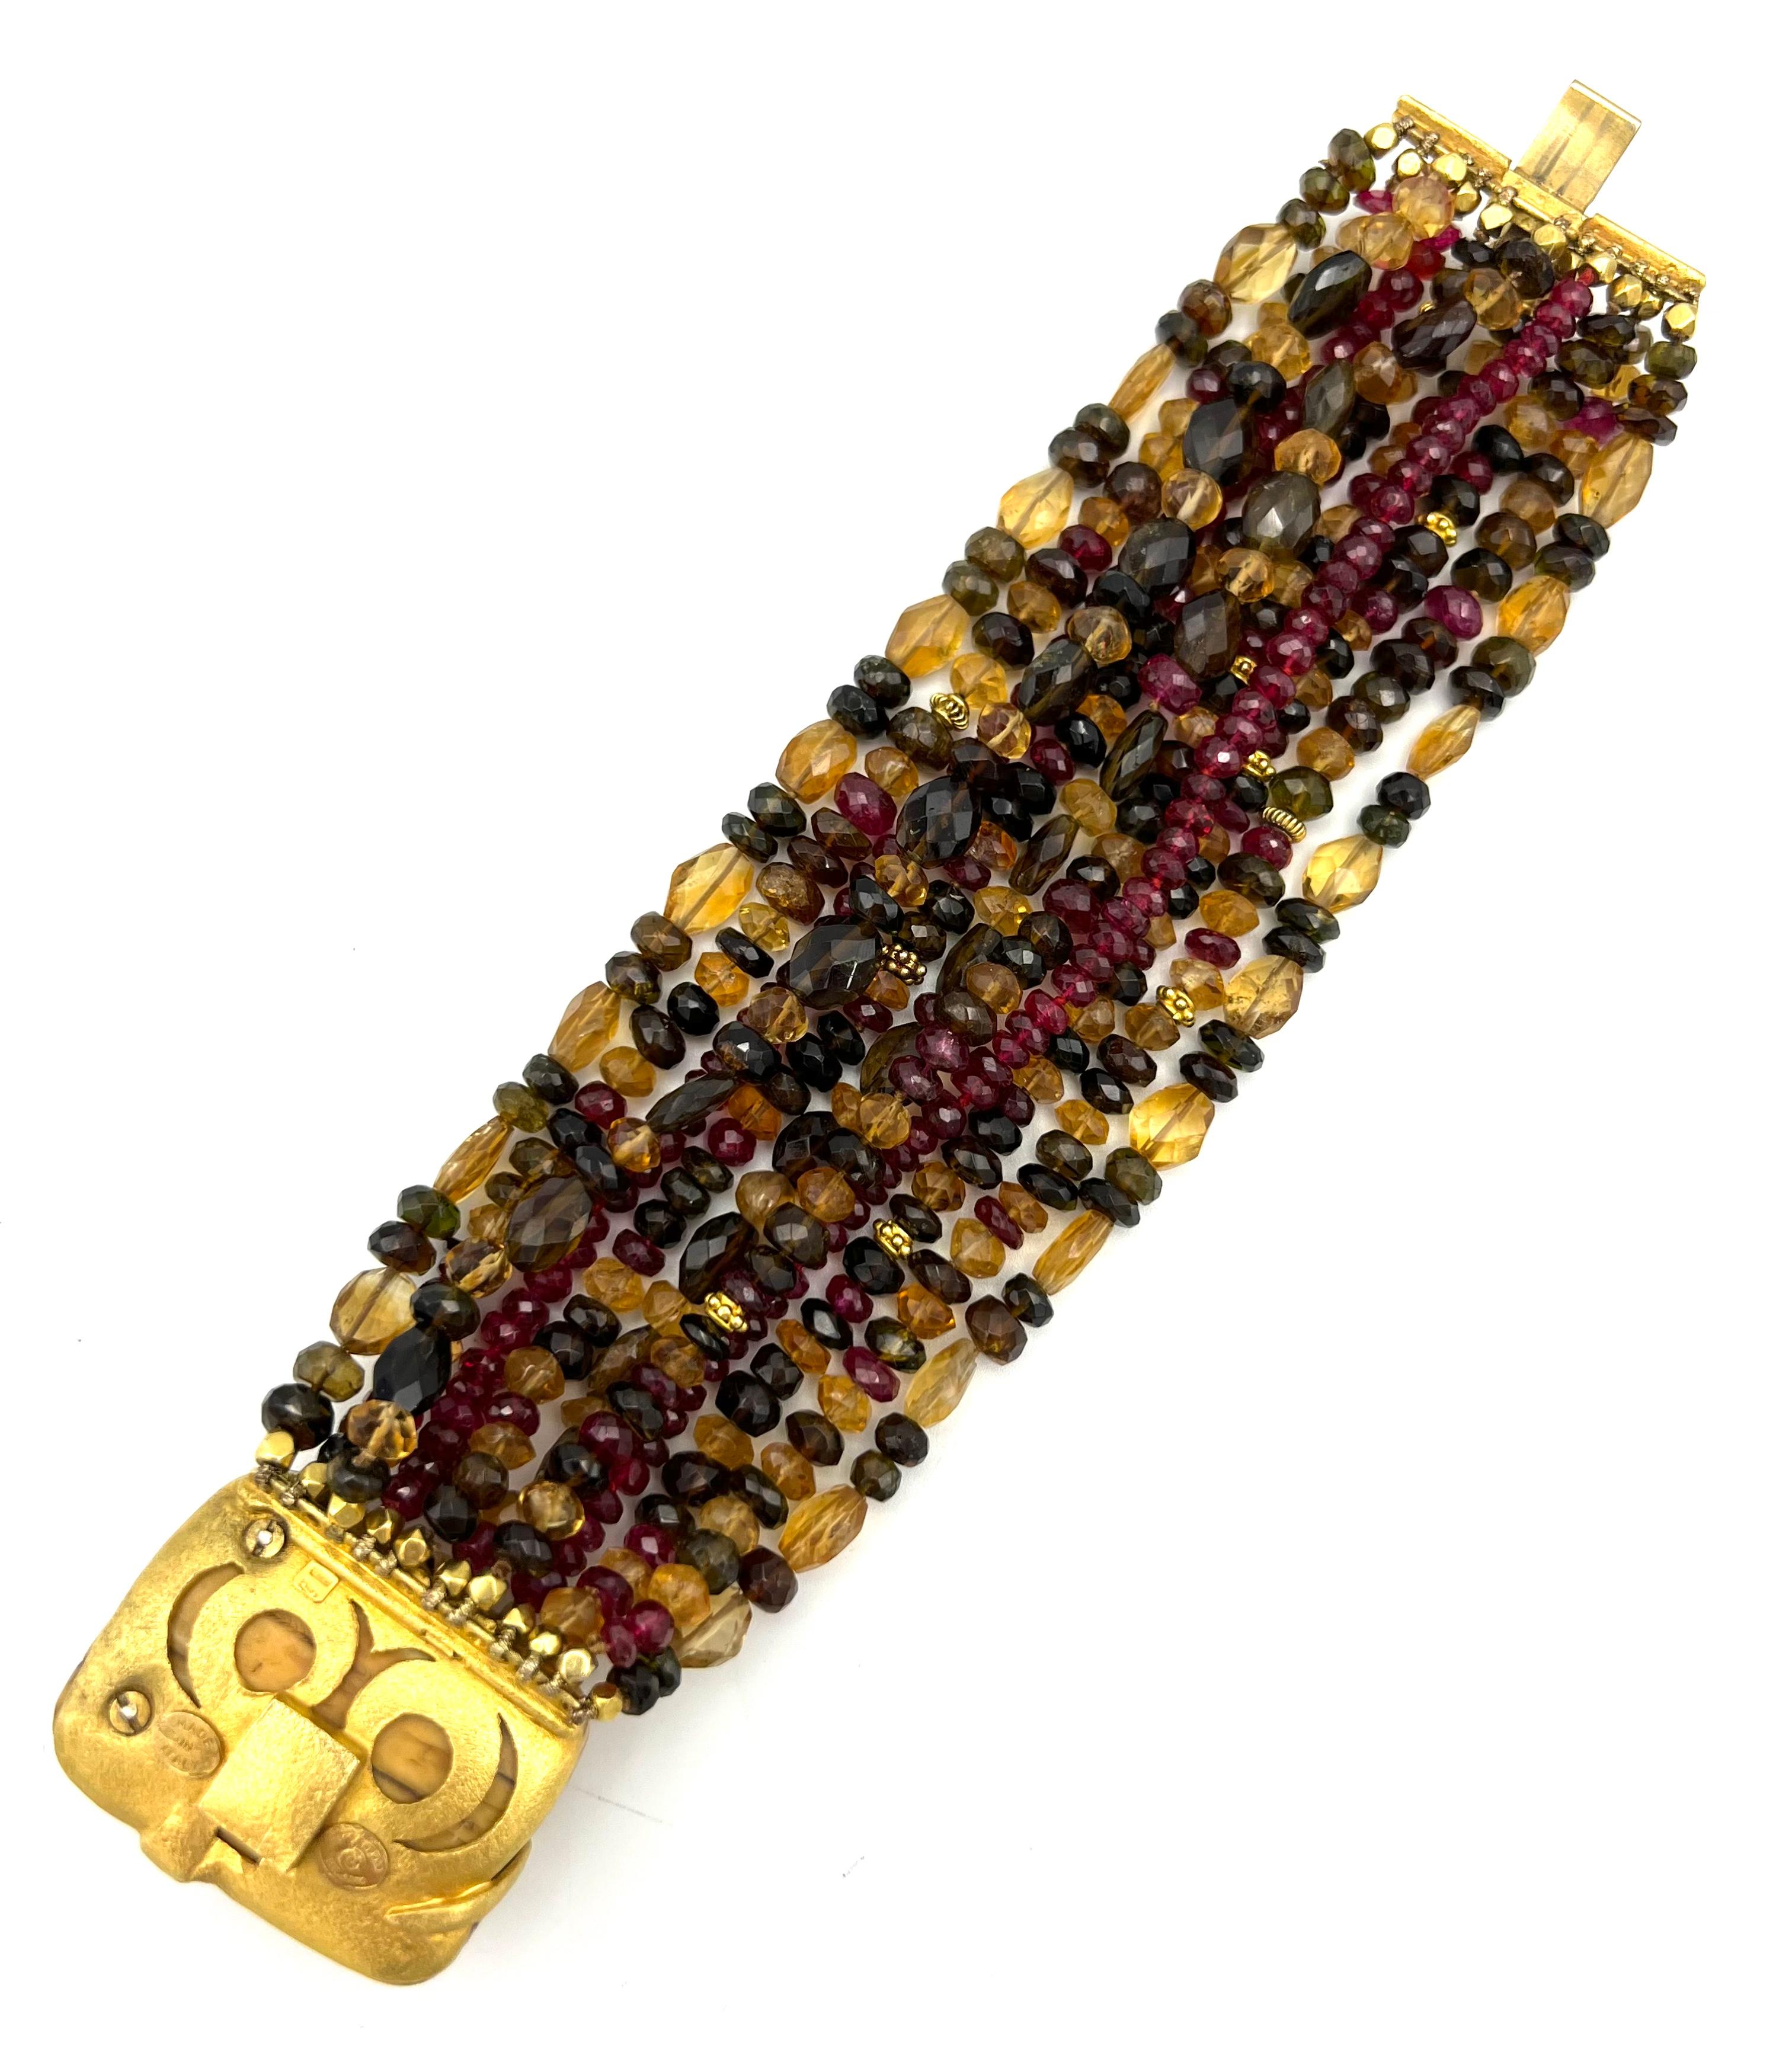 Women's or Men's Paola Ferro Yellow Gold and Gemstone Bead Bracelet For Sale